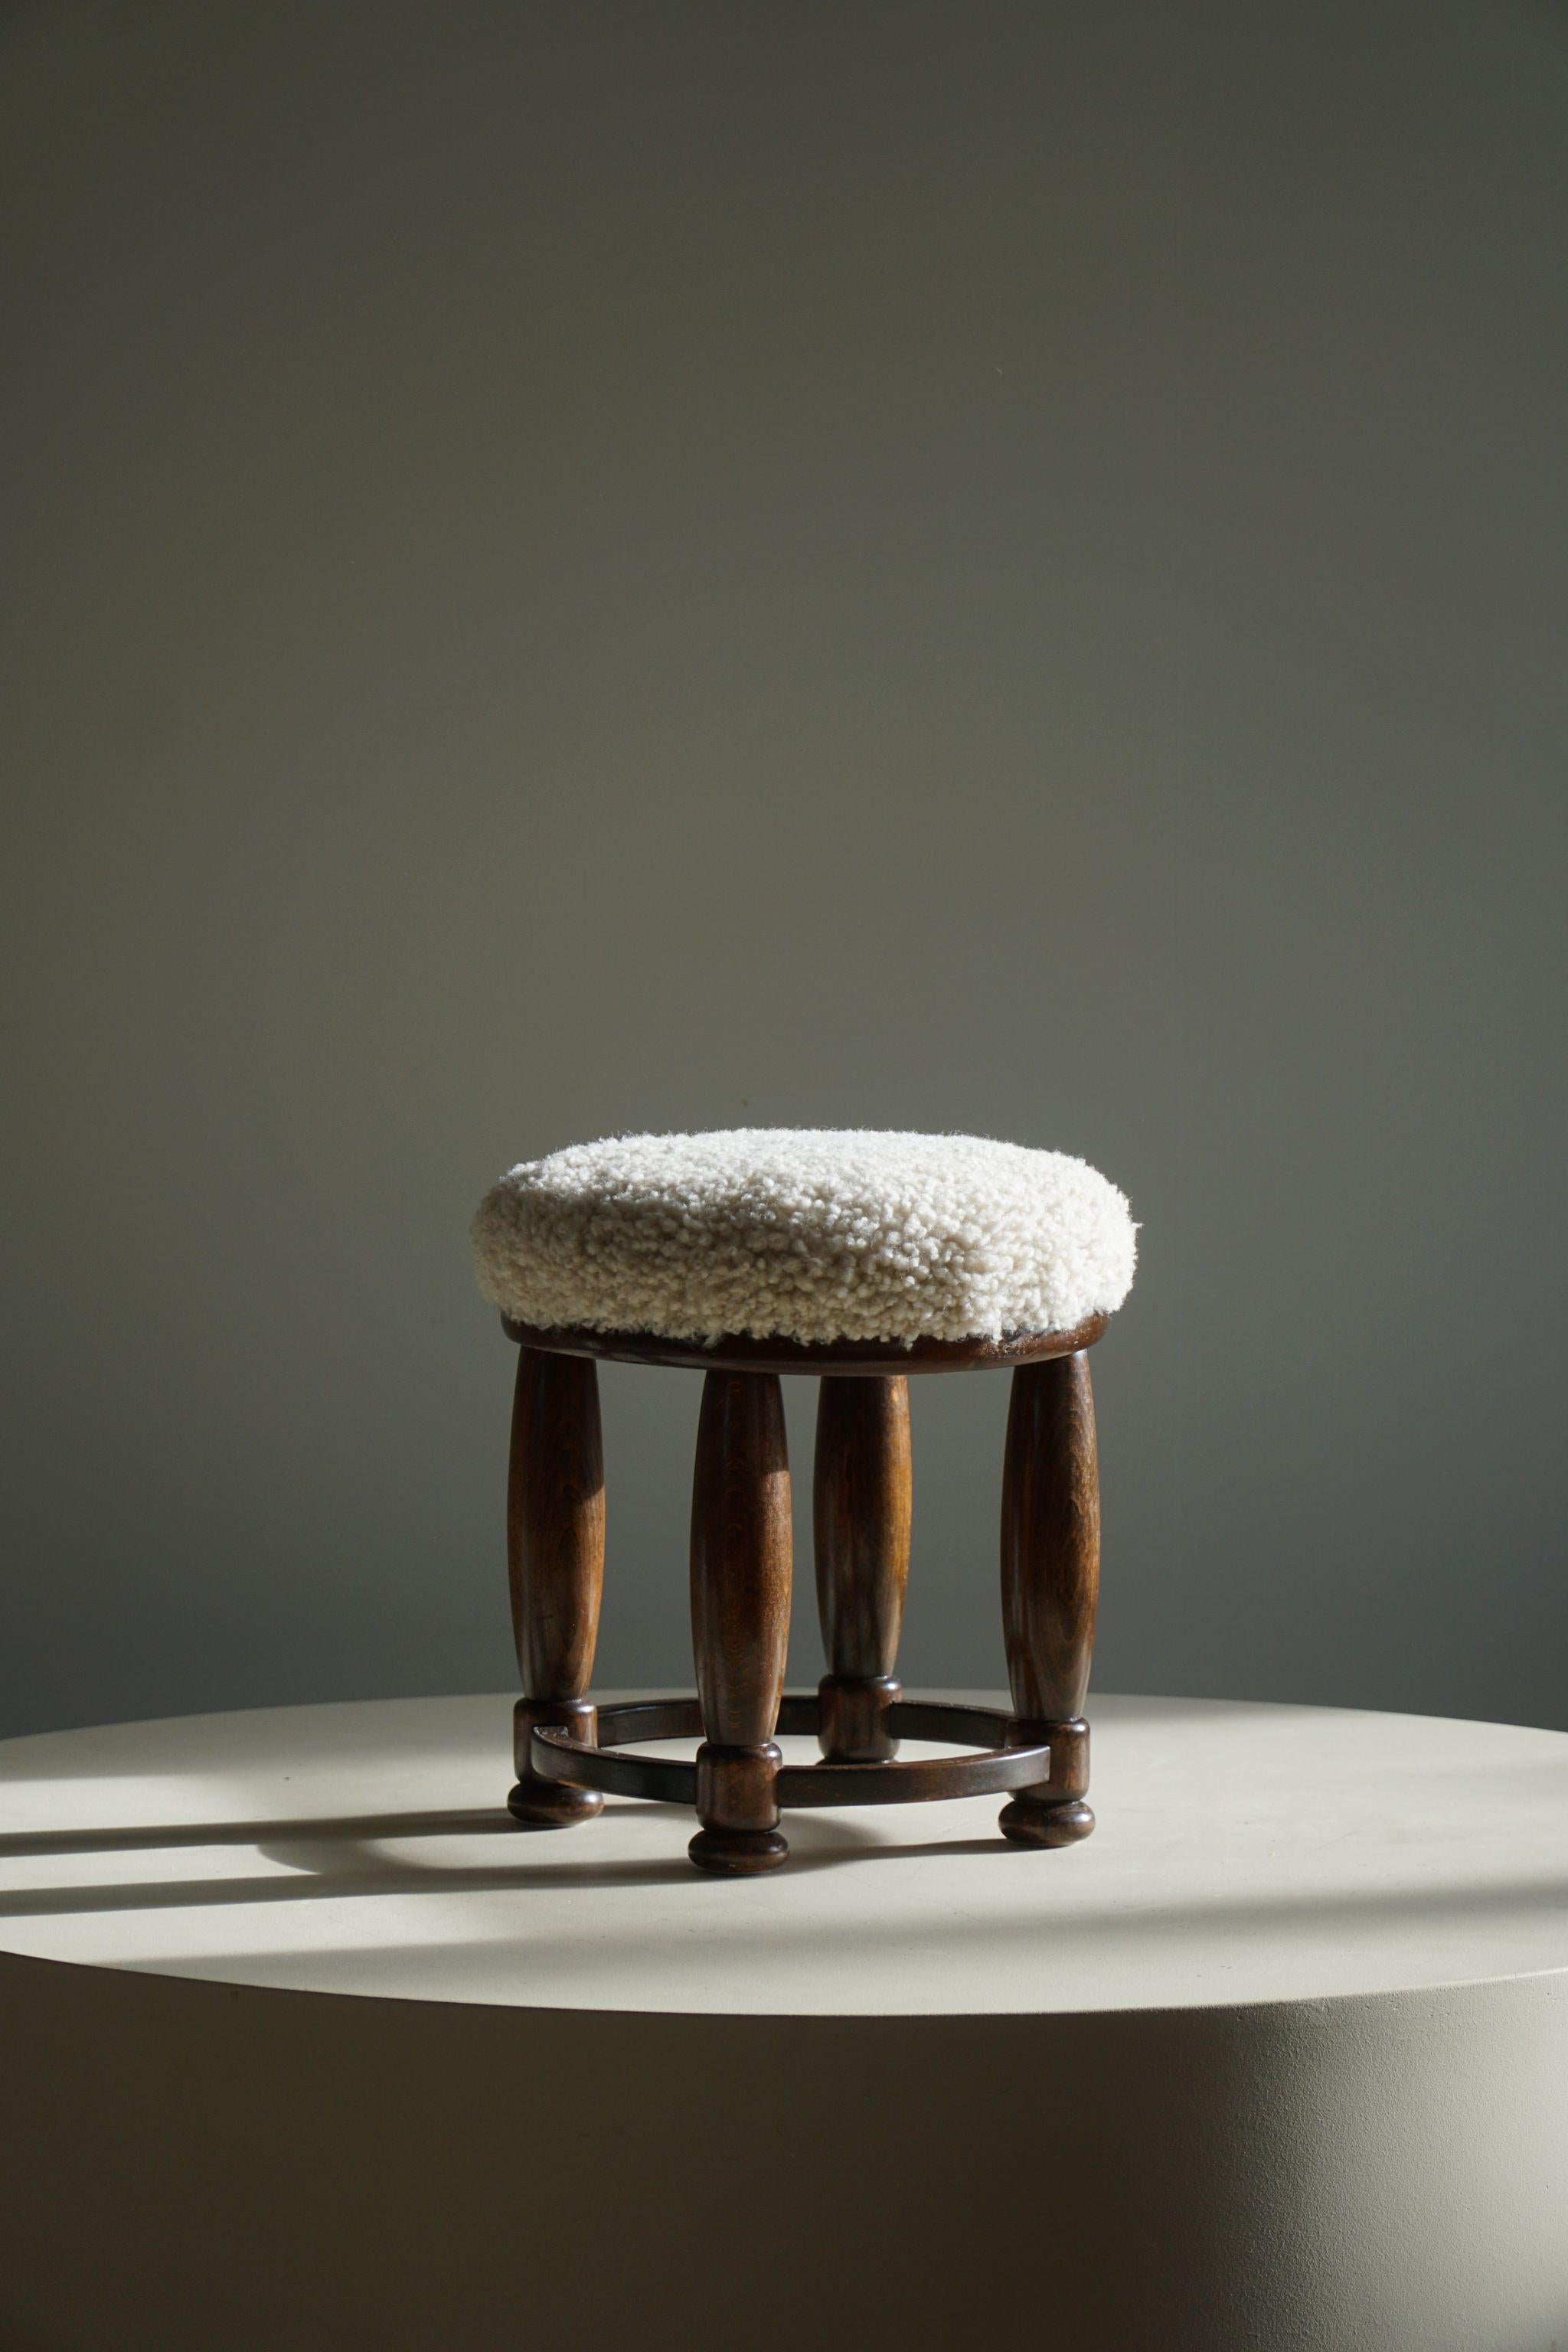 A lovely round Art Deco stool in beech and reupholstered seat in a great quality shearling lambswool. Made by a Danish cabinetmaker in the 1940s.

This nice footstool will fit in many interior styles. A modern, Scandivinavian, Art Deco interior or a